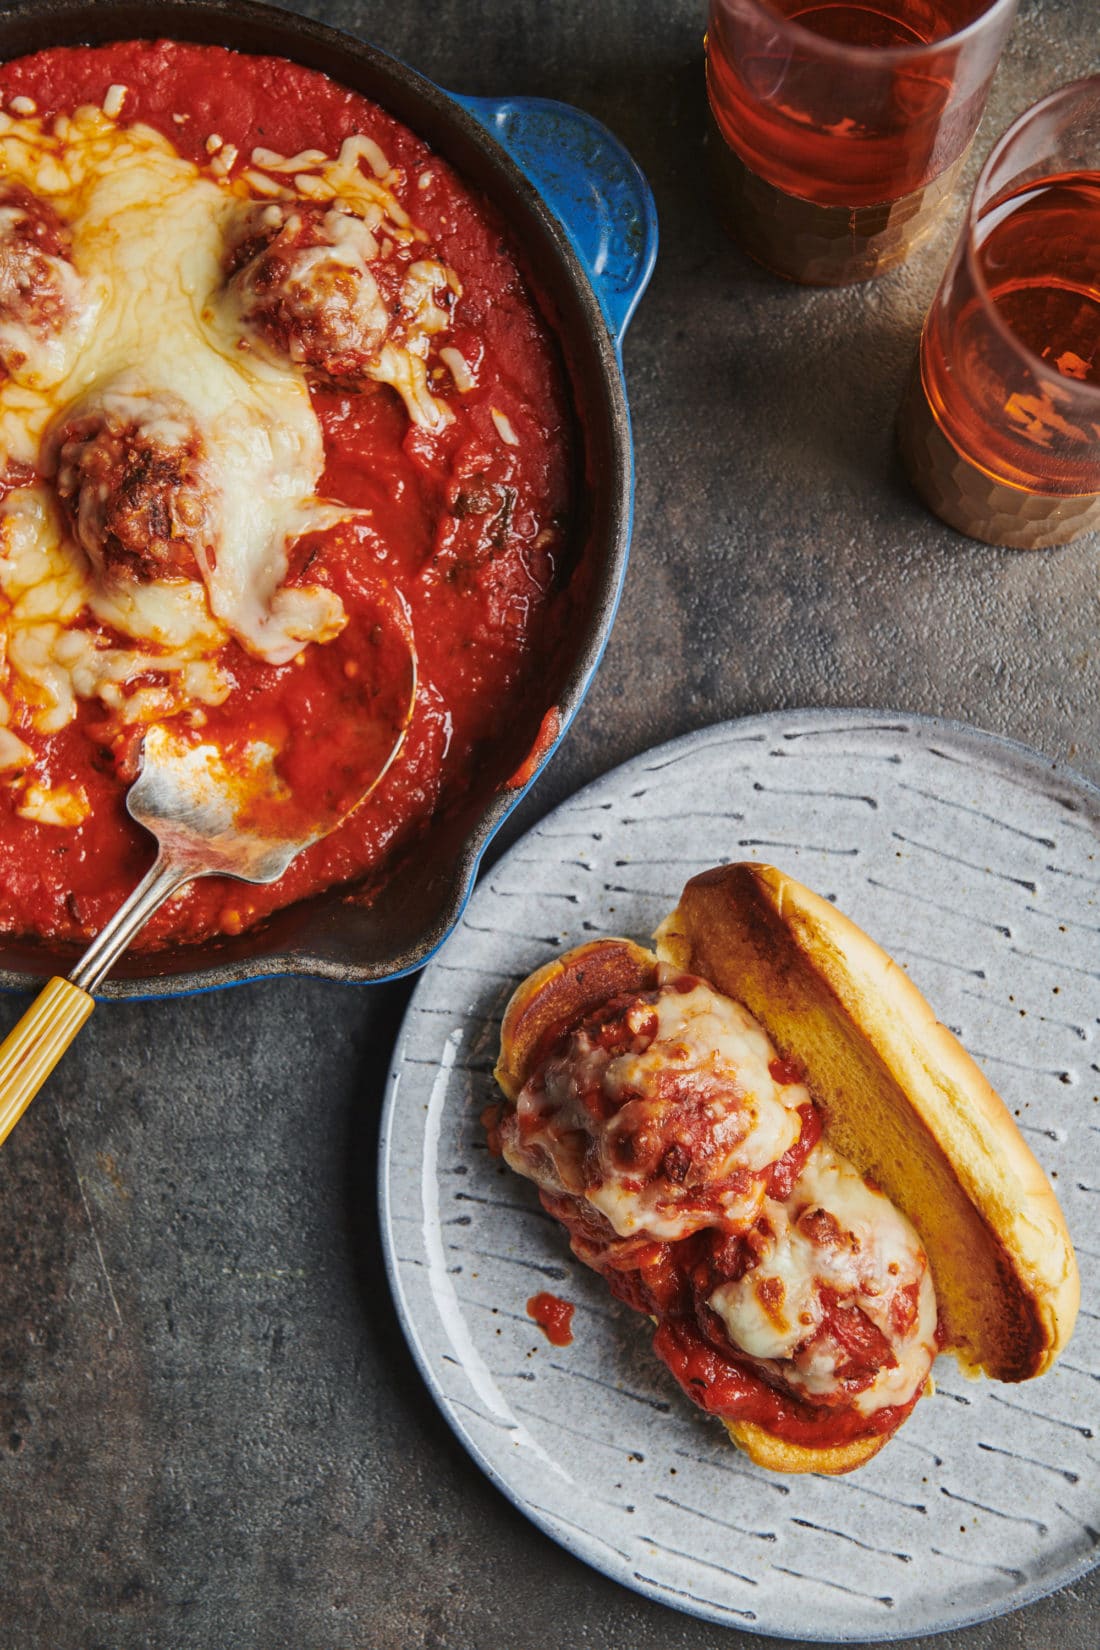 Meatball Sub next to a pan of meatballs.